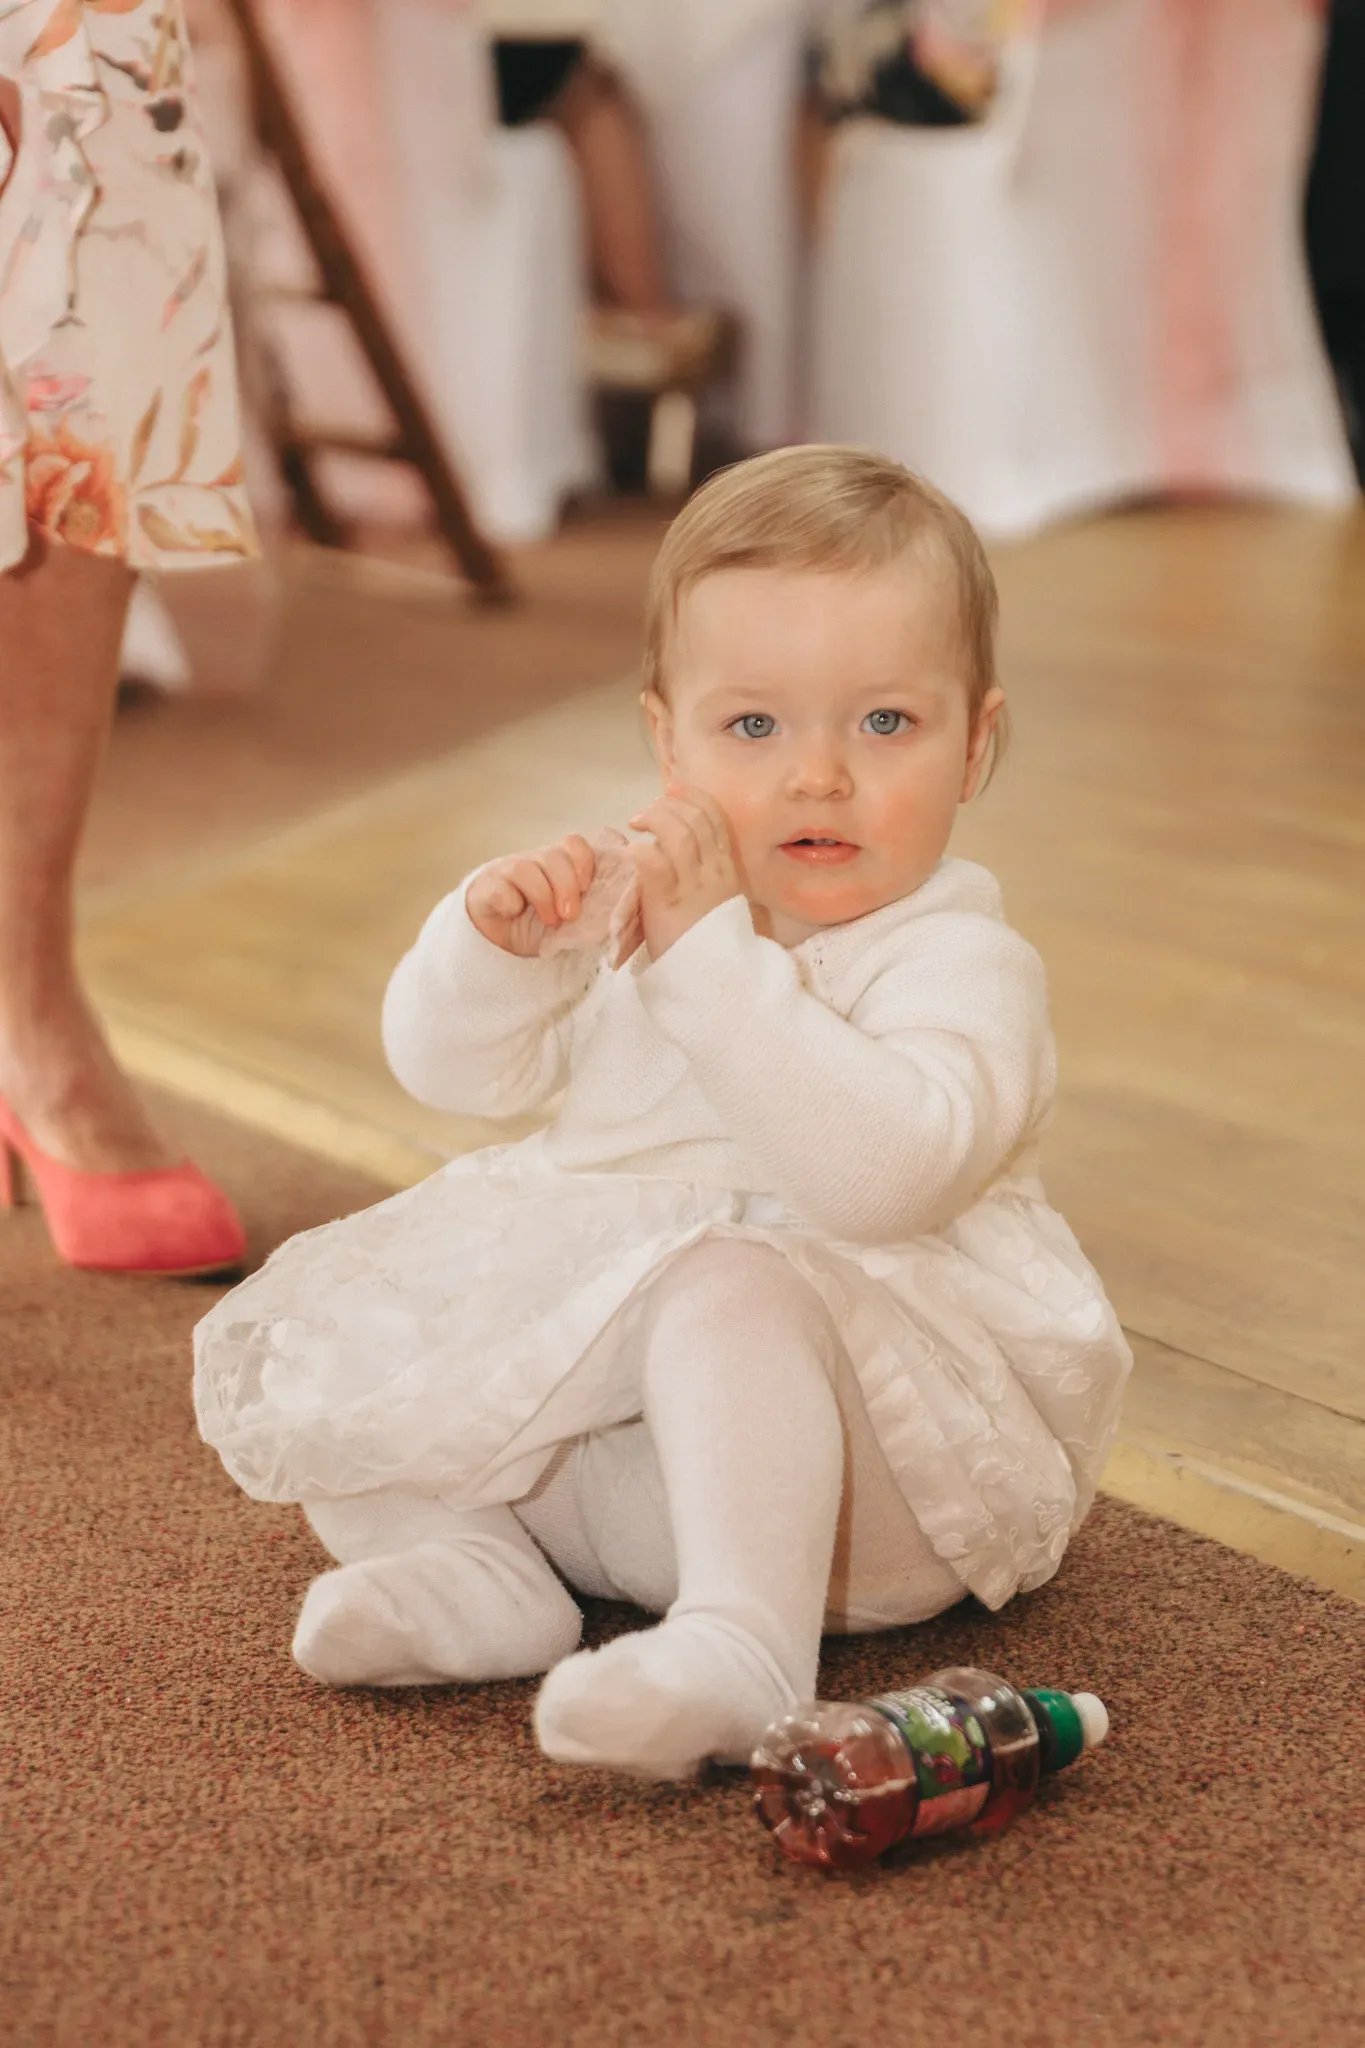 A toddler in a white dress and tights sits on a wooden floor, holding their hands together. the child has blue eyes and light brown hair, with a colorful toy nearby. a partial view of two adults is in the background.